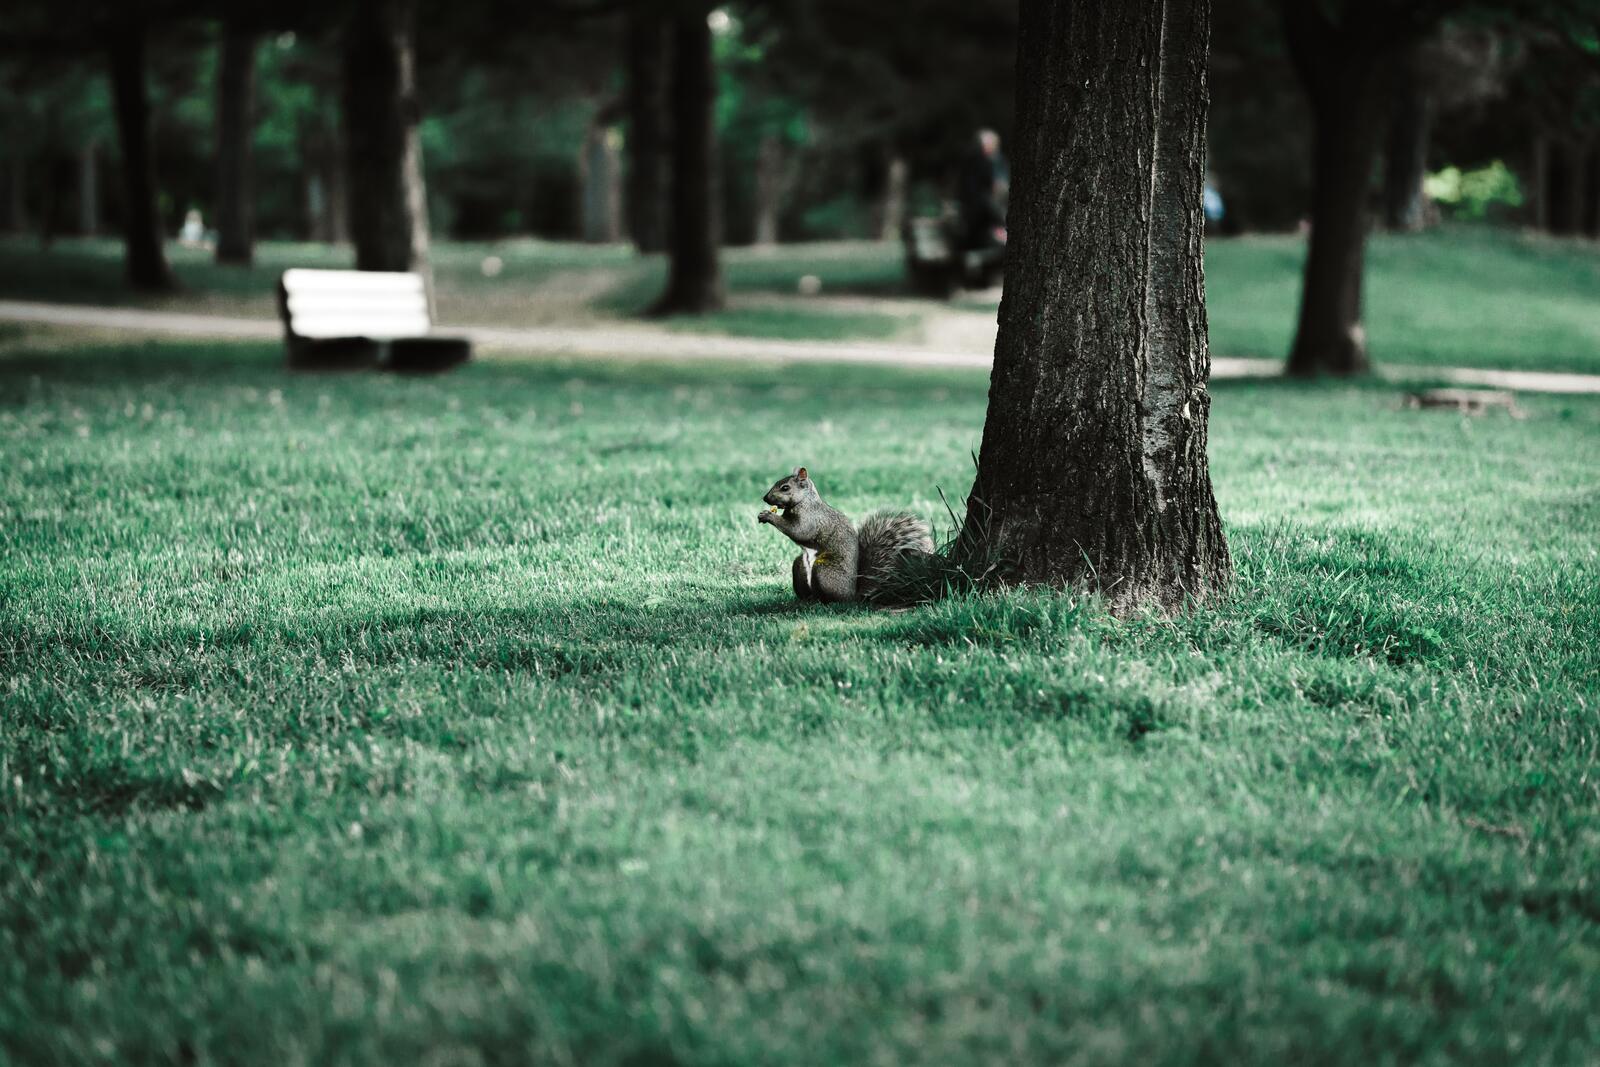 Free photo A squirrel in the park came down from a tree